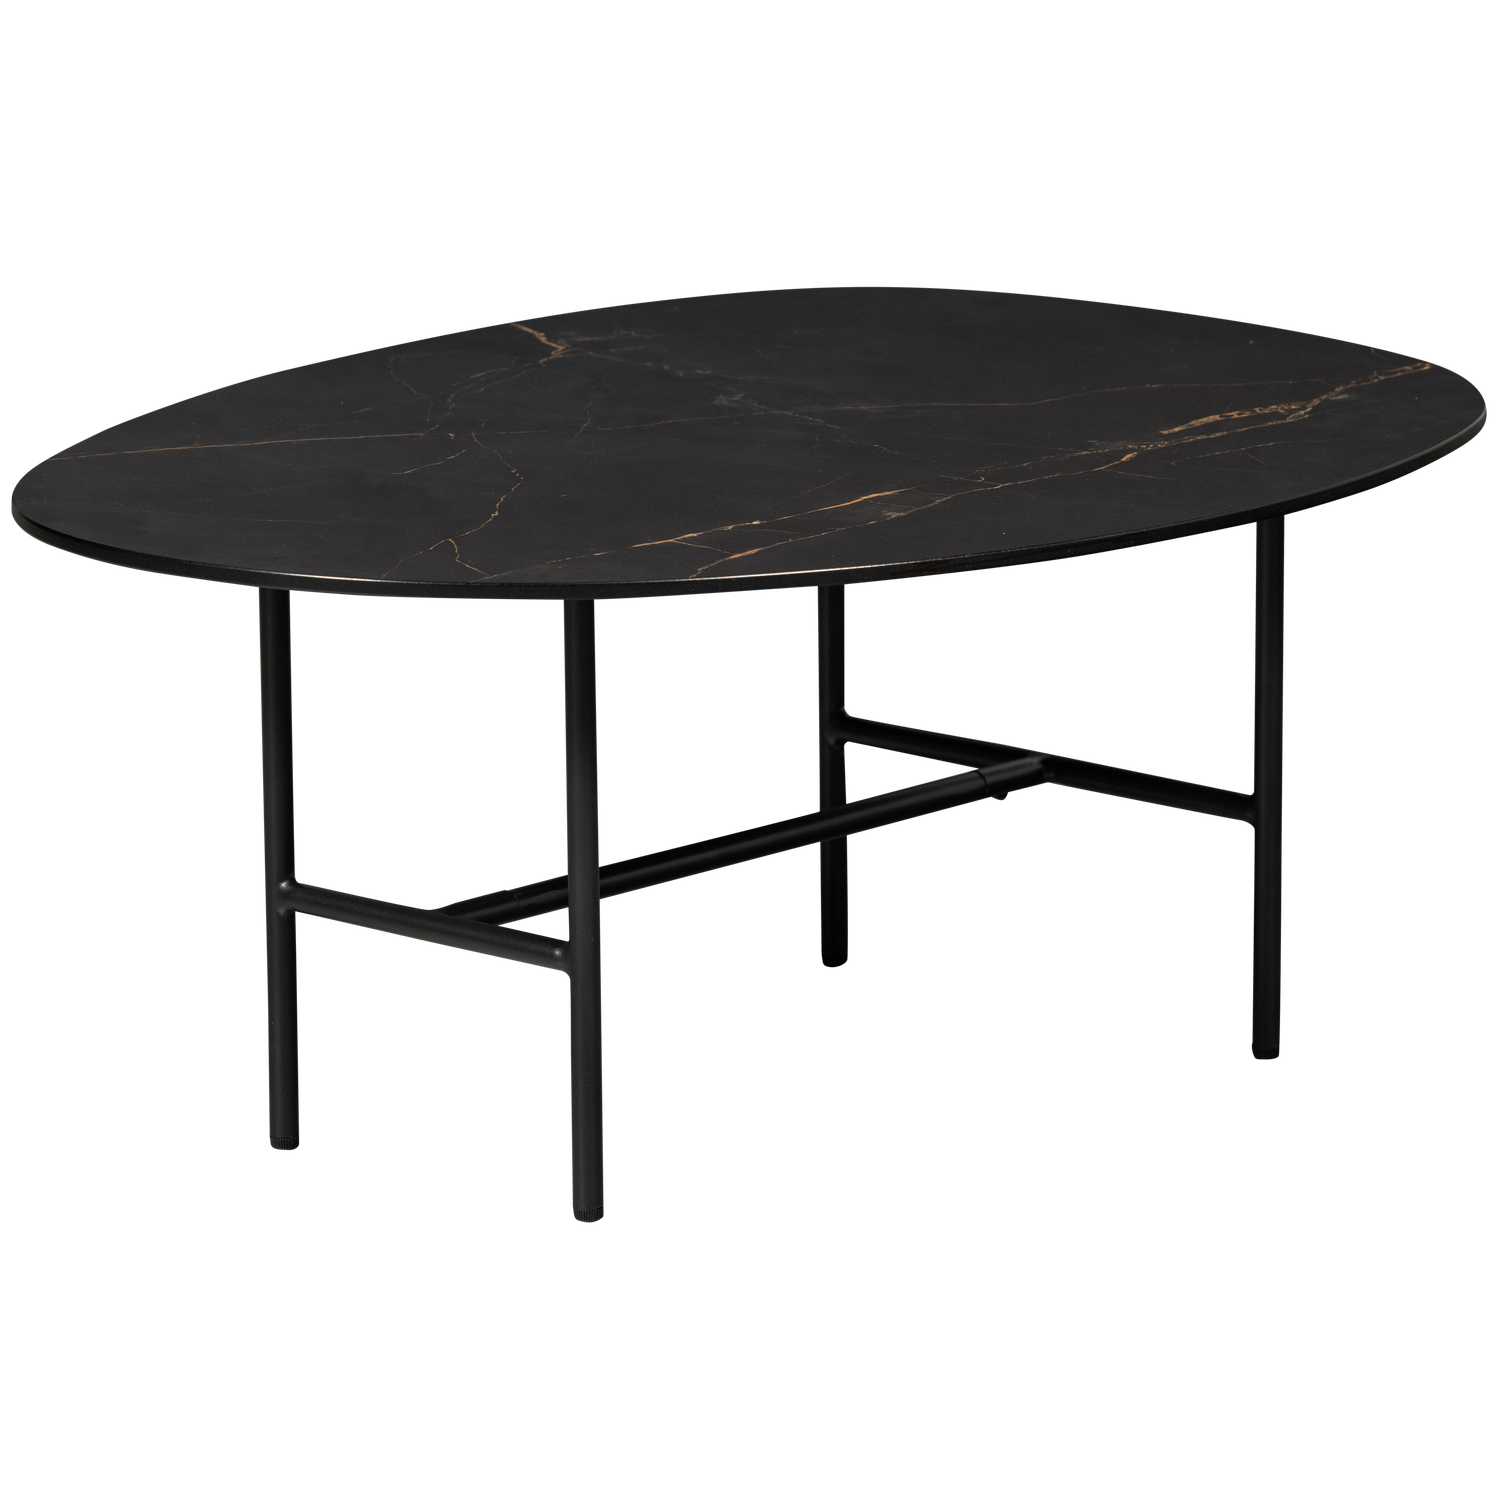 VAJEN COFFEE TABLE WITH MARBLE LOOK TABLETOP BLACK 80x60C